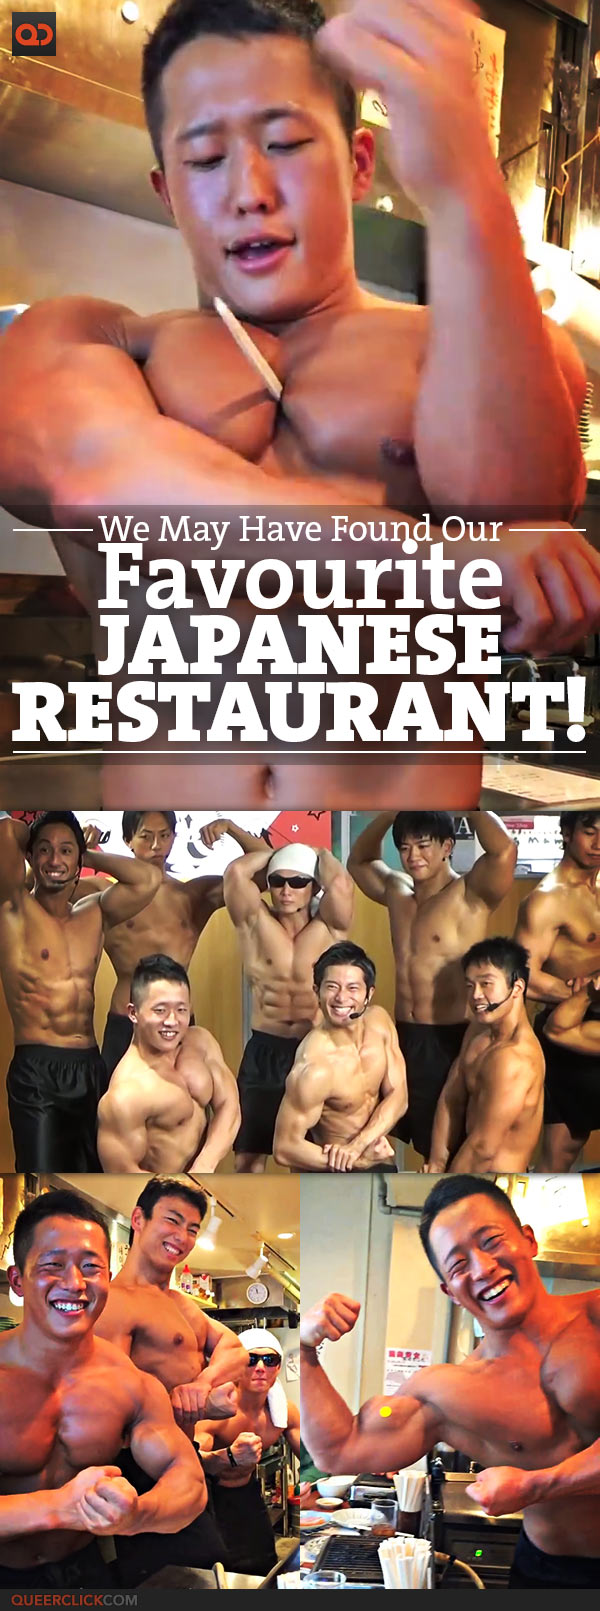 We May Have Found Our Favourite Japanese Restaurant Yet!